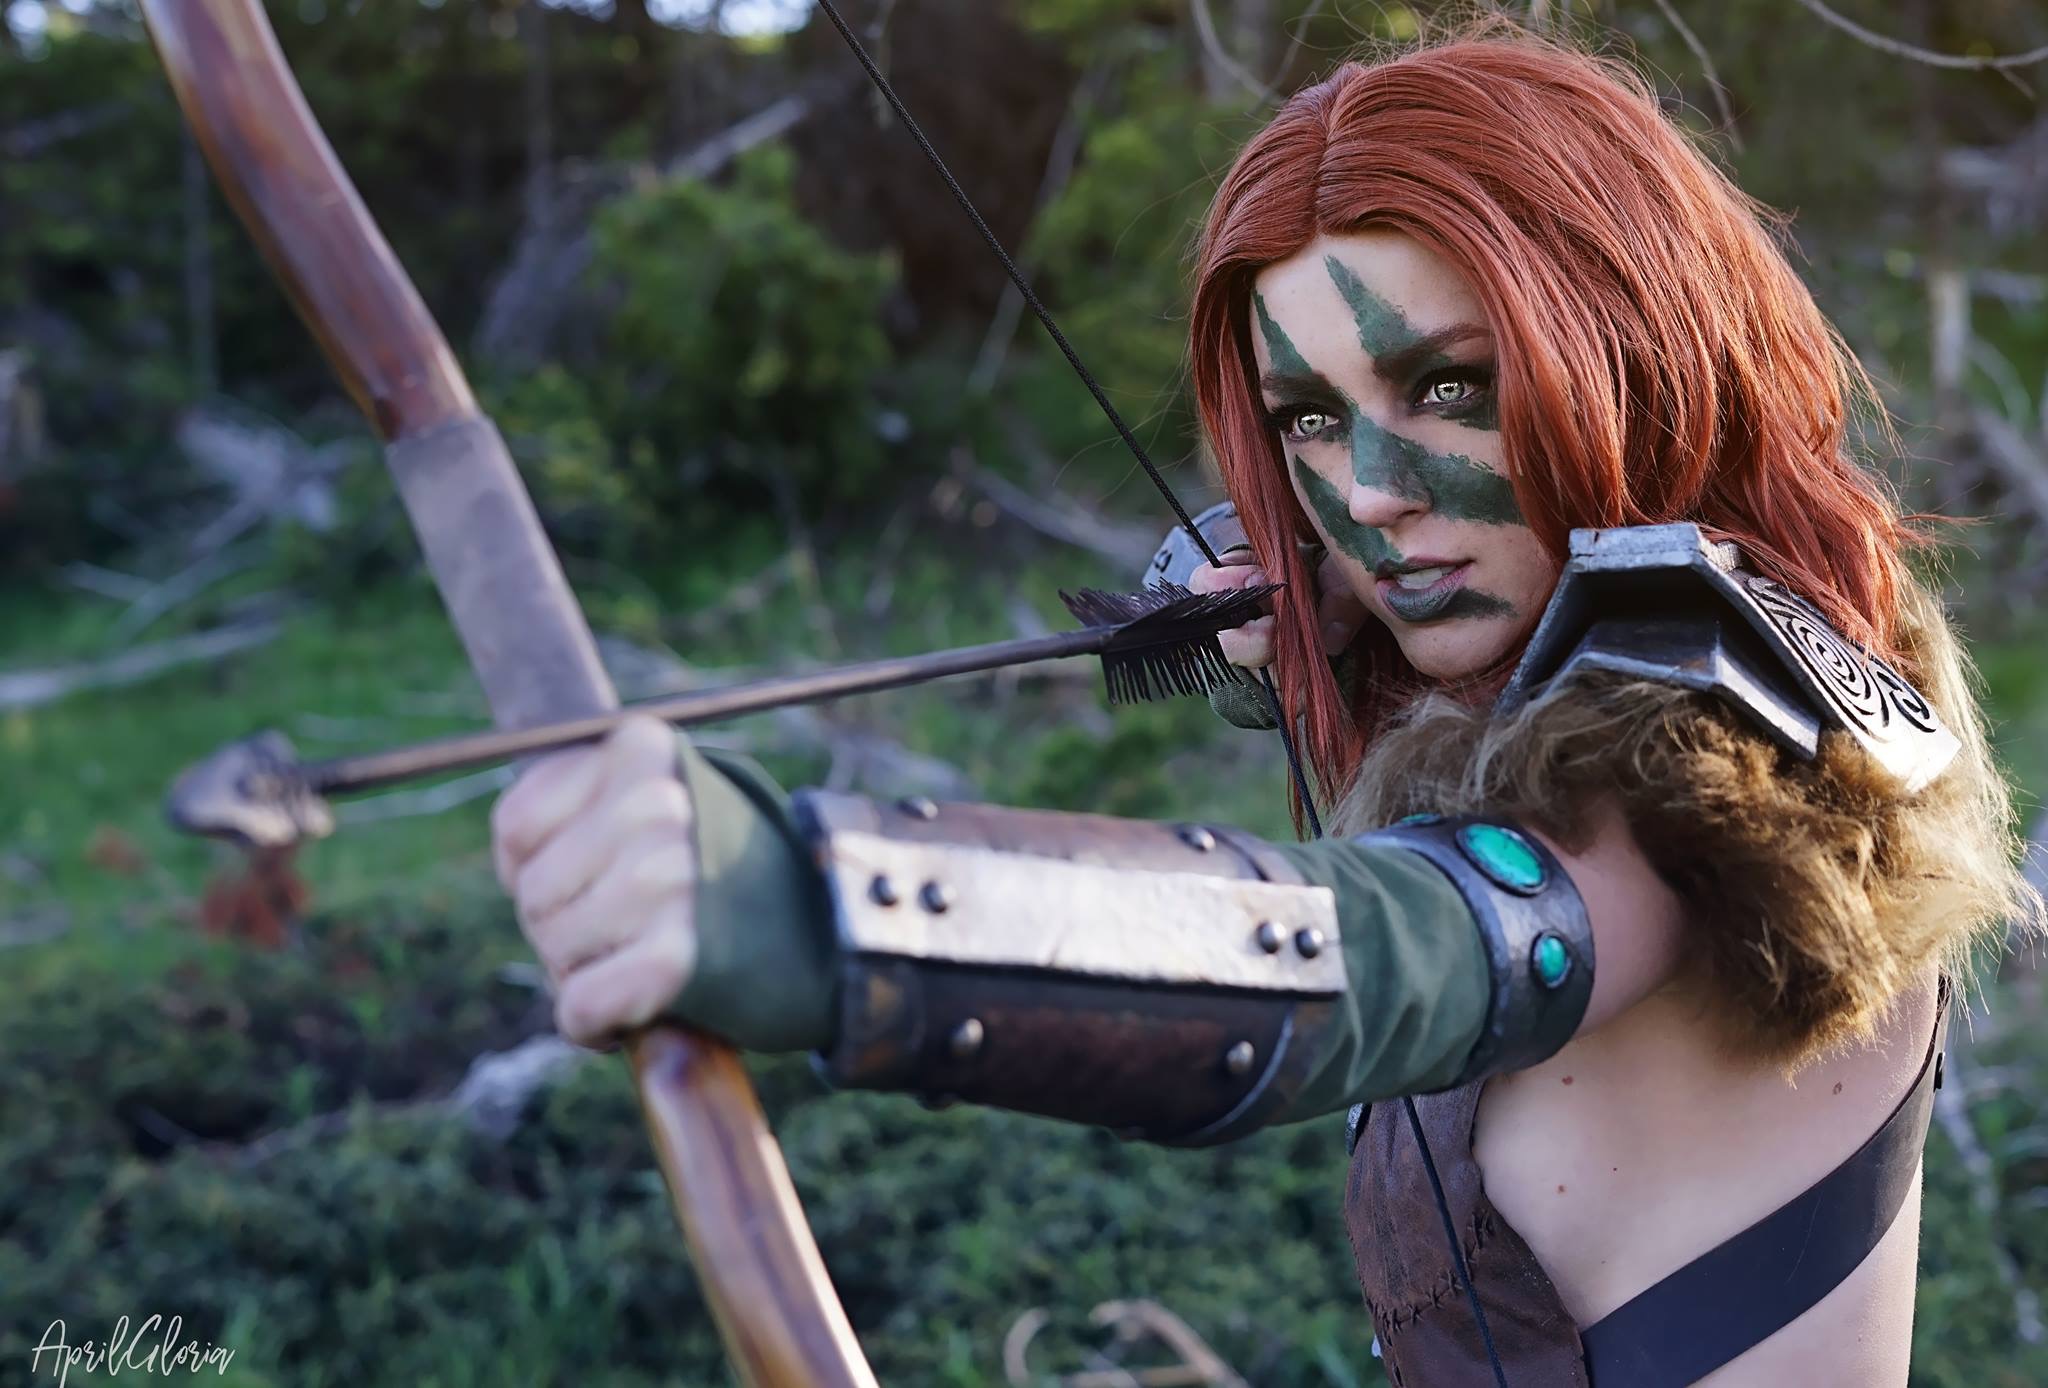 The Daily Crate | Exclusive: Q&A with the talented cosplayer April Gloria!